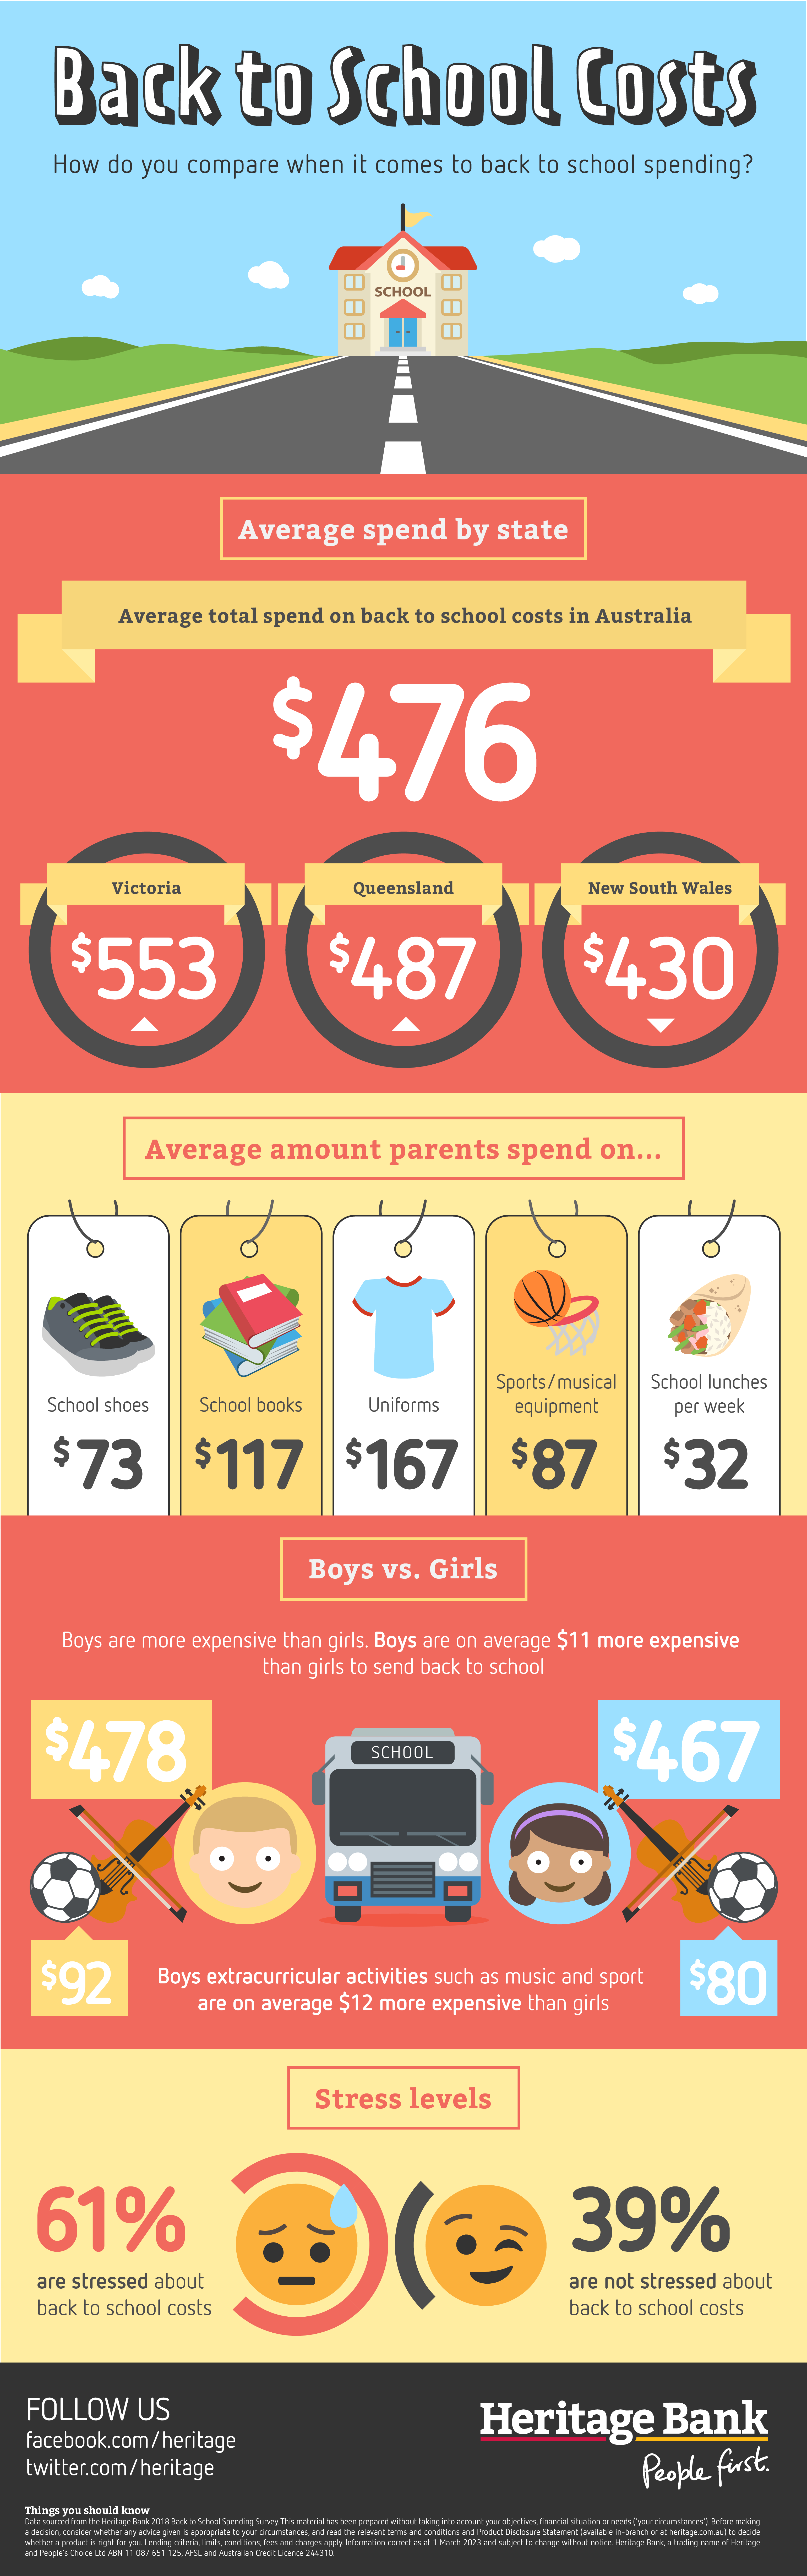 How much do Aussies spend on back to school costs